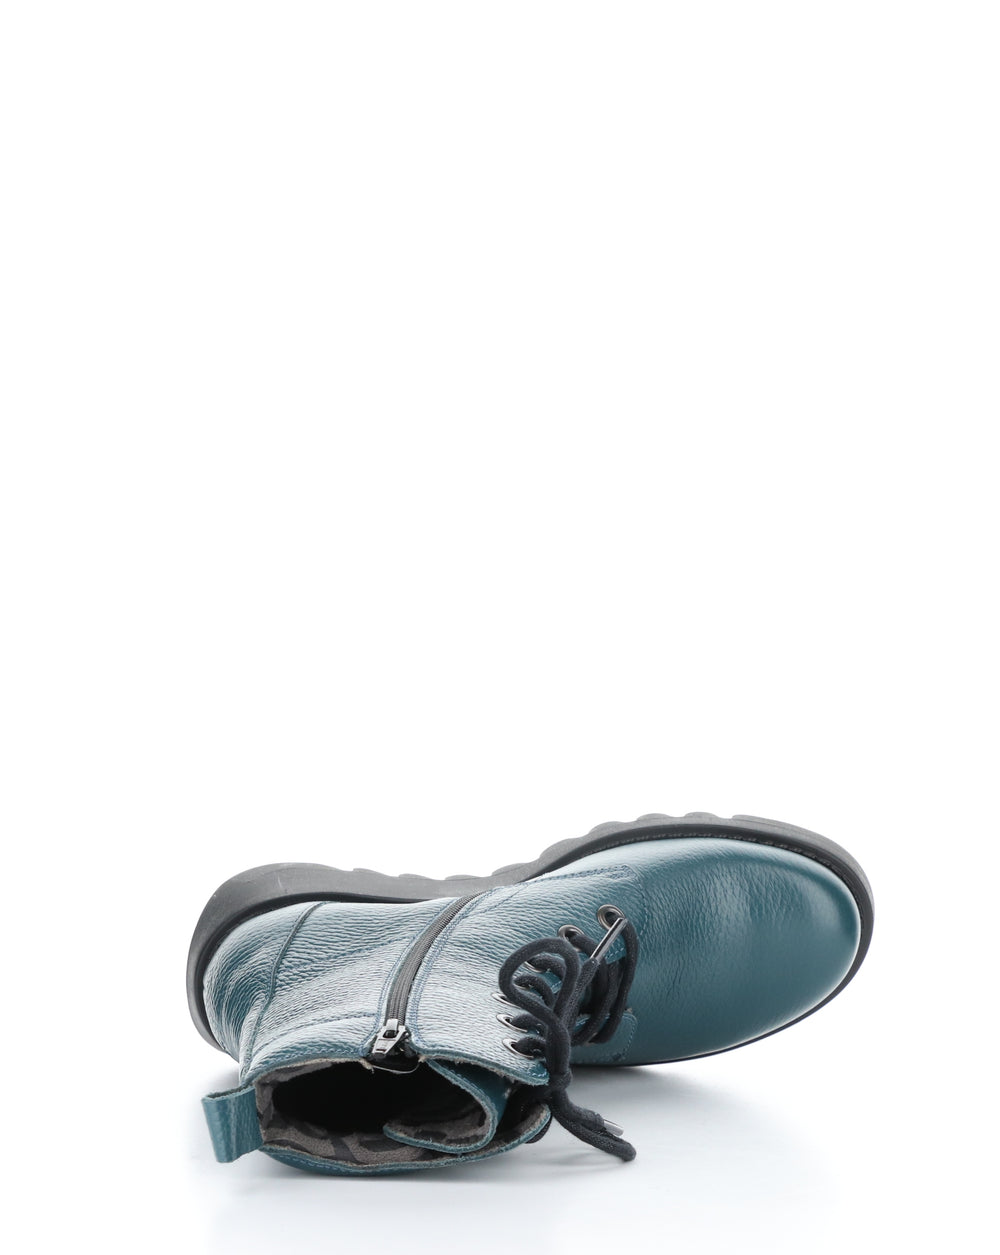 SILF015FLY 007 TEAL Round Toe Boots